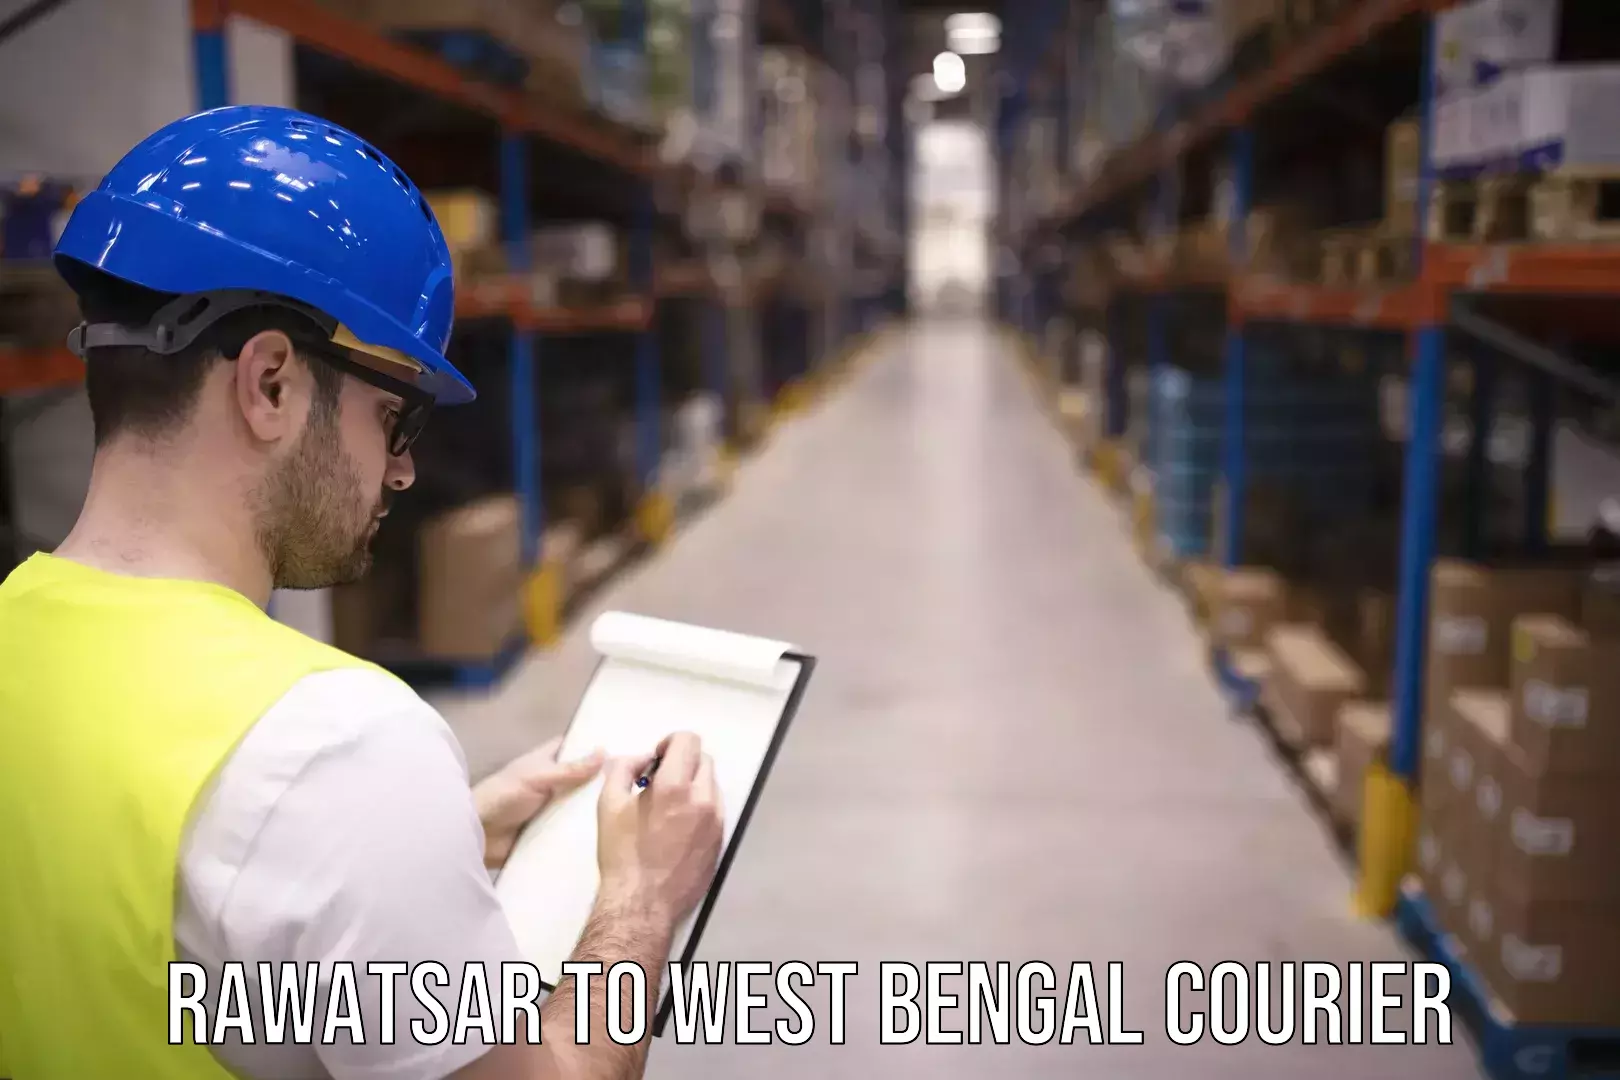 High-capacity parcel service Rawatsar to West Bengal